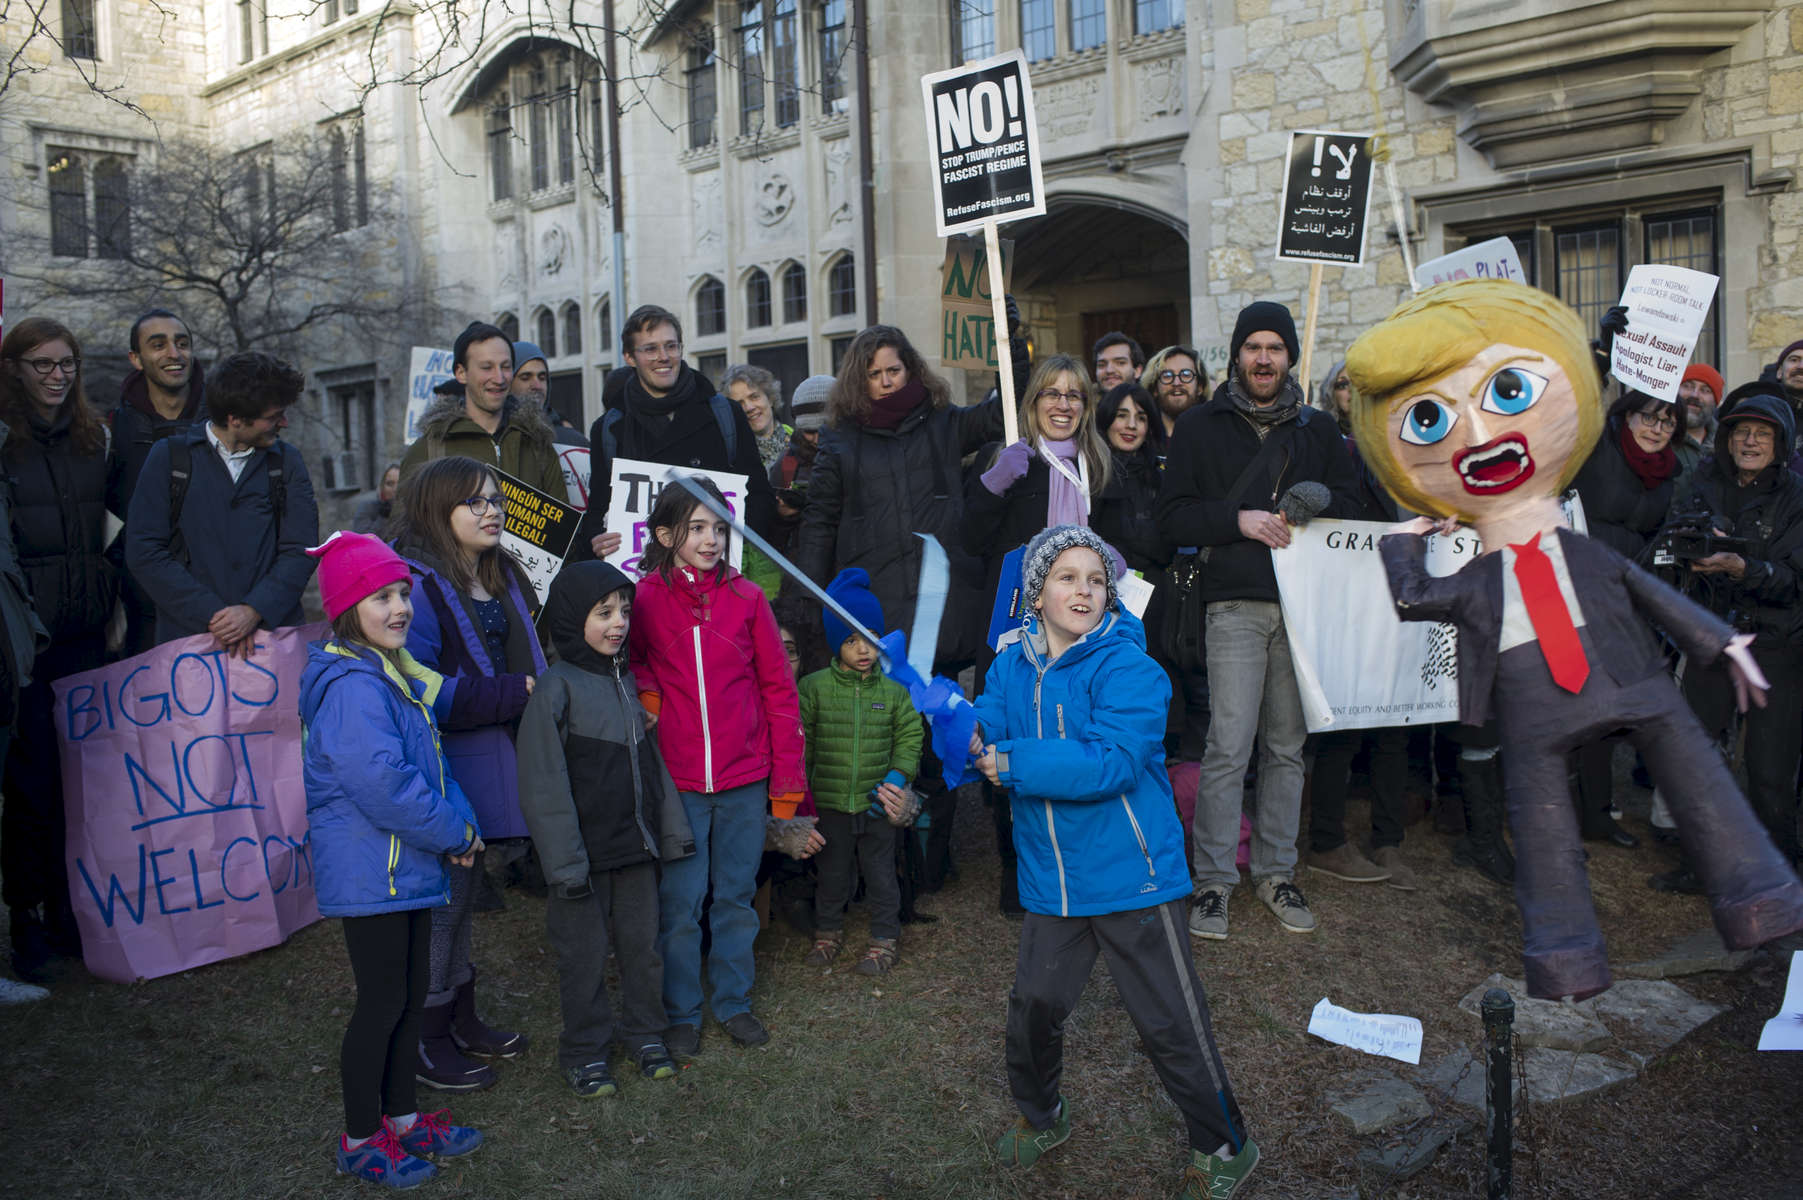 Eight-year-old Luka Vegna-Spofford prepares to decapitate a piñata effigy of Donald Trump on the courtyard lawn of University Church, 5655 S. University Ave., during a demonstration against political operative and former Trump campaign manager Corey Lewandowski as he visits the University of Chicago, Wednesday, February 15, 2017.